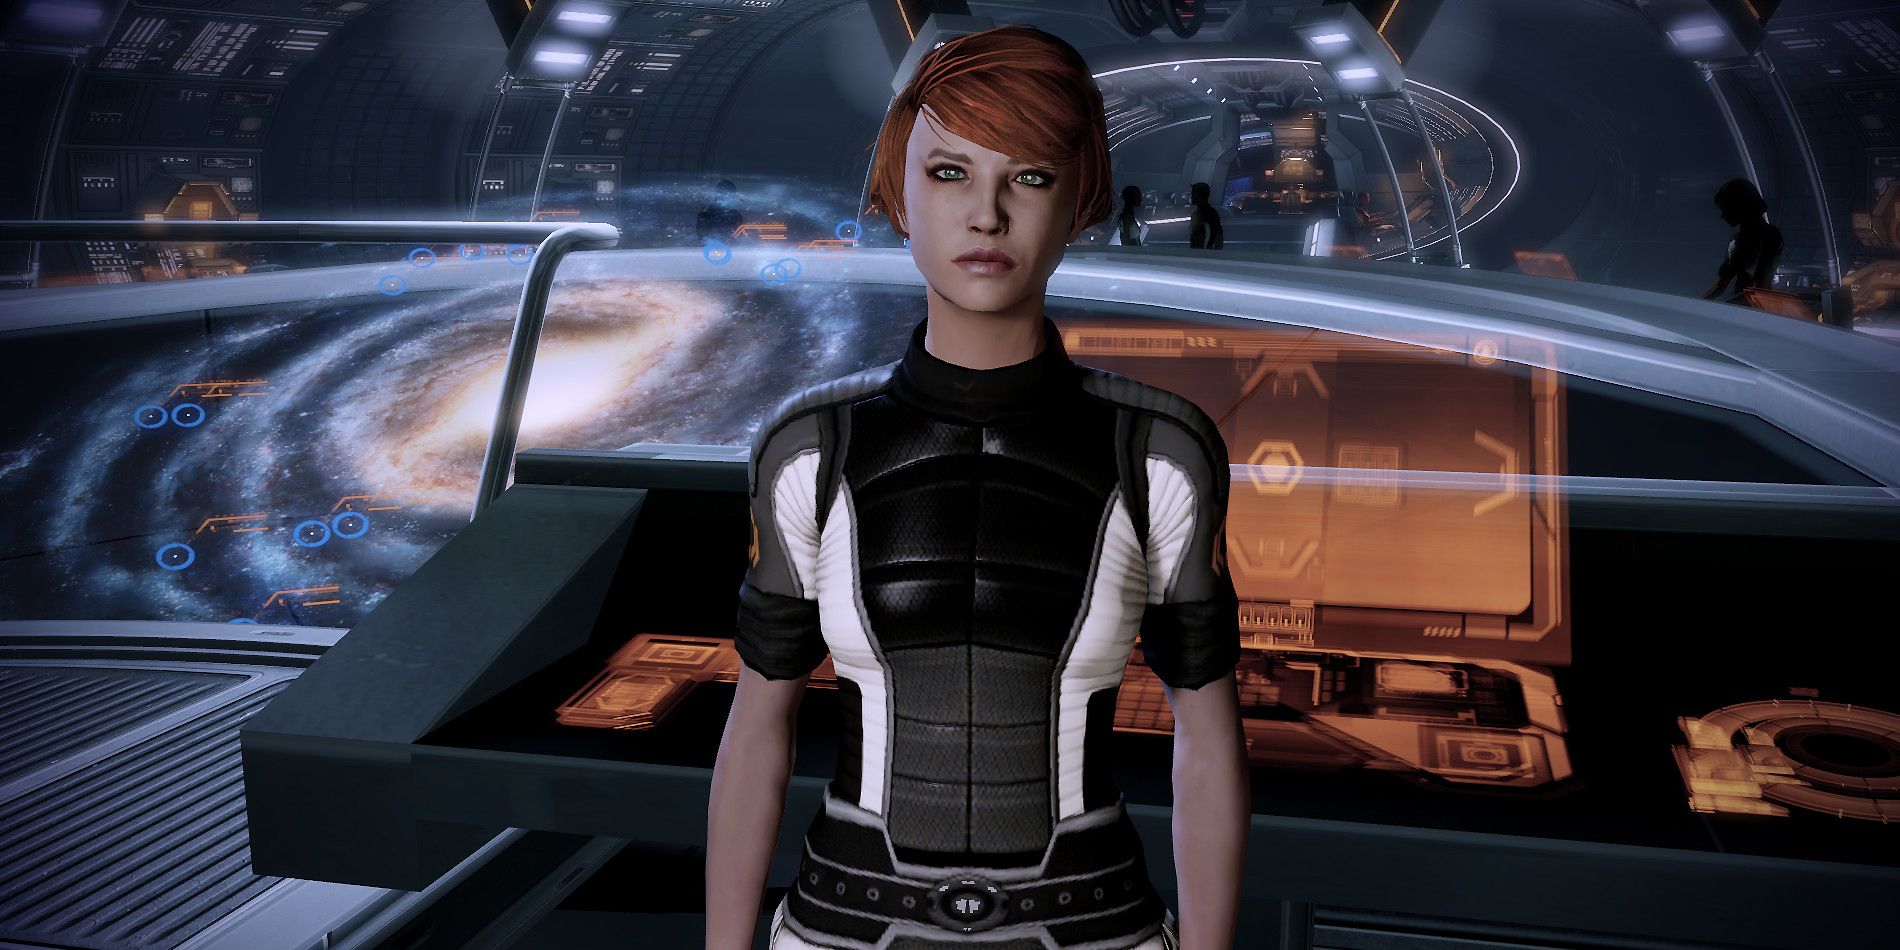 Kelly watches over the Normandy in Mass Effect 2